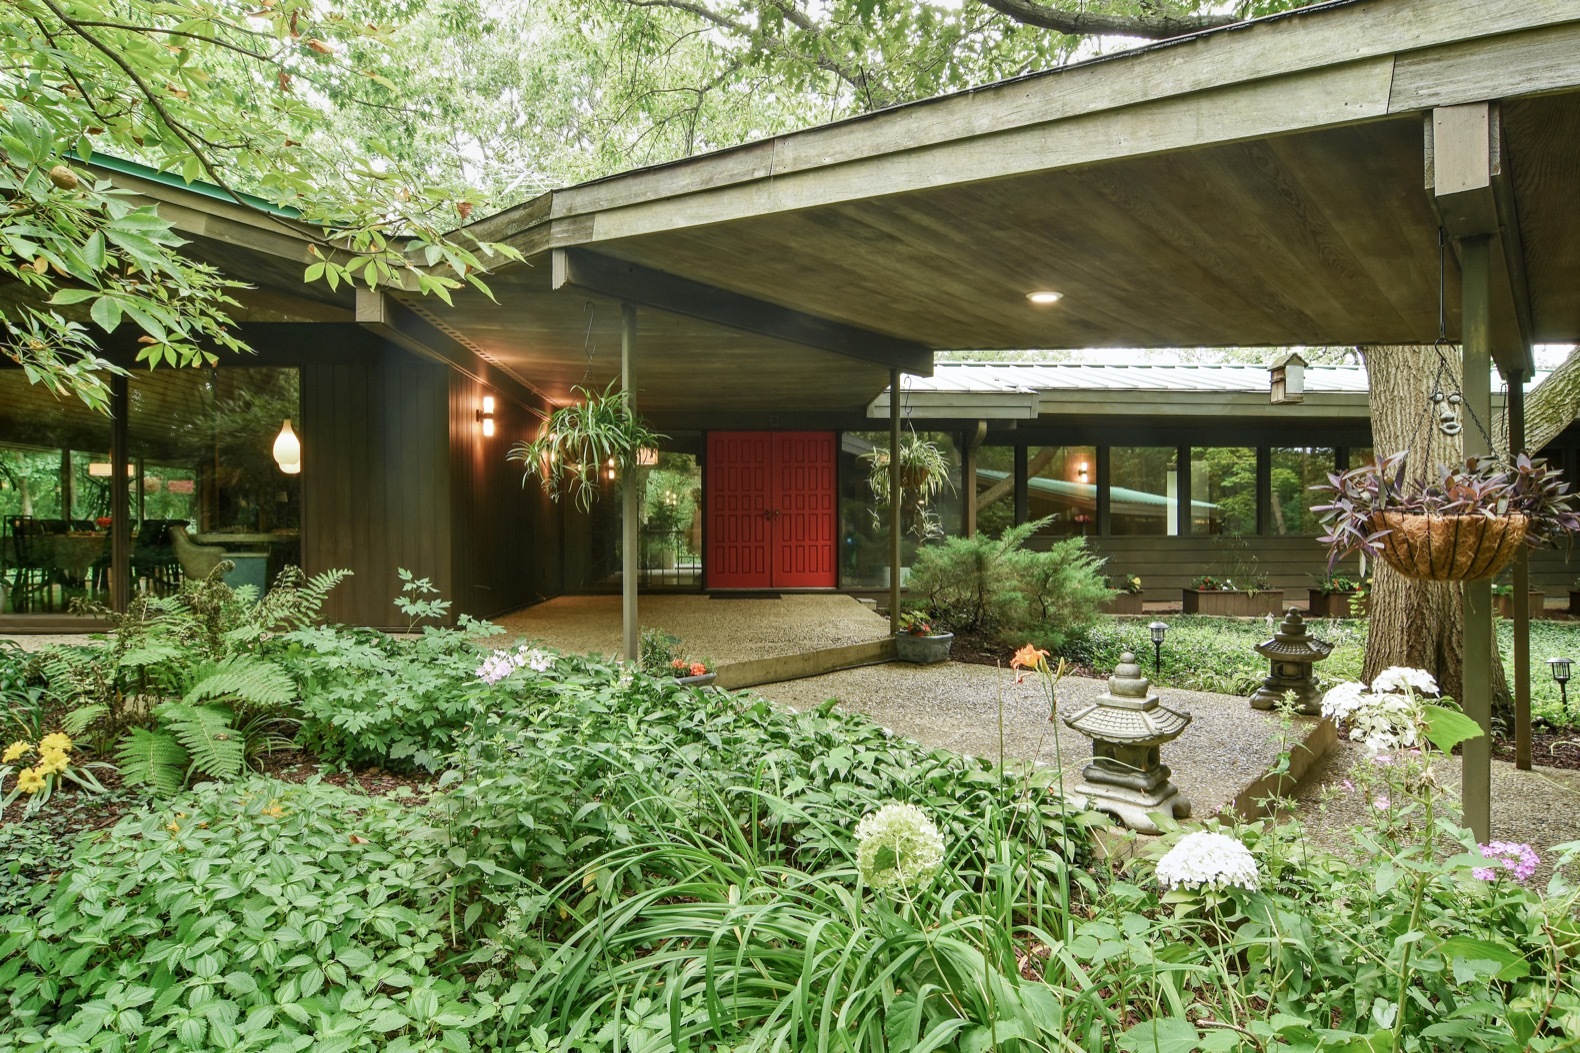 A Frank Lloyd Wright-Inspired Home Near Chicago Hits the Market 